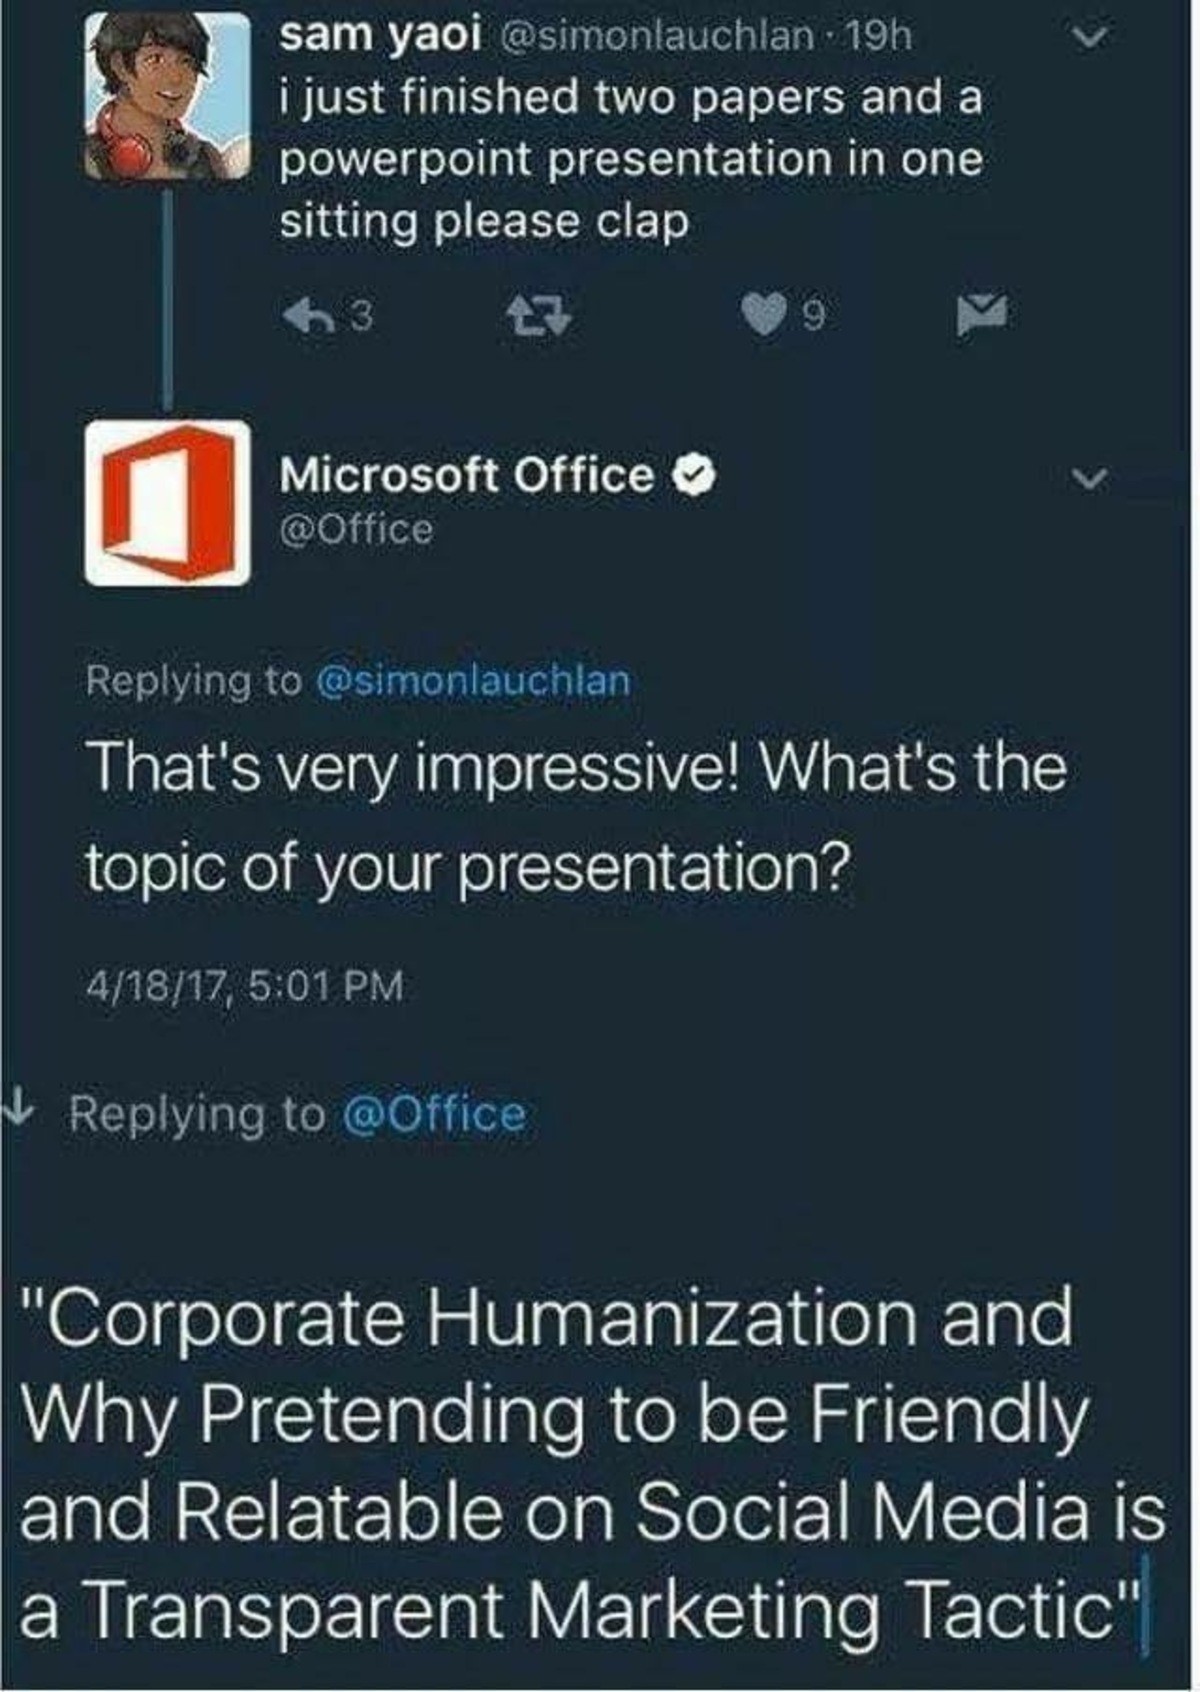 Tyslai Ittayta Zyenoriv. . f f Host finished two papers and a powerpoint presentation in one sitting please clap tii) Microsoft Office (ti) That' s very impress